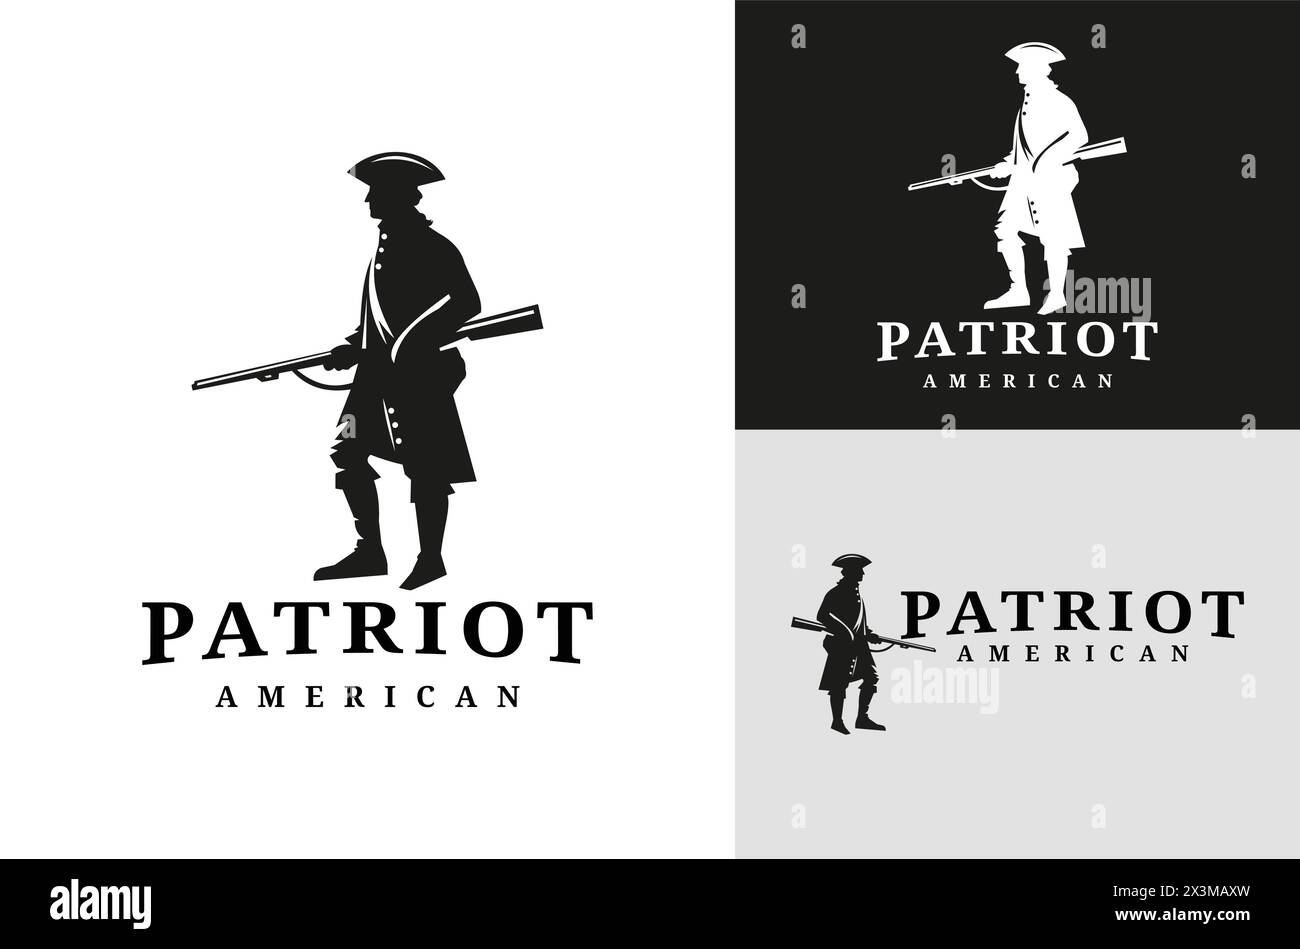 Classic American Patriot Silhouette. Vintage Illustration Design of United States Revolutionary War Soldiers on a black and white background Stock Vector